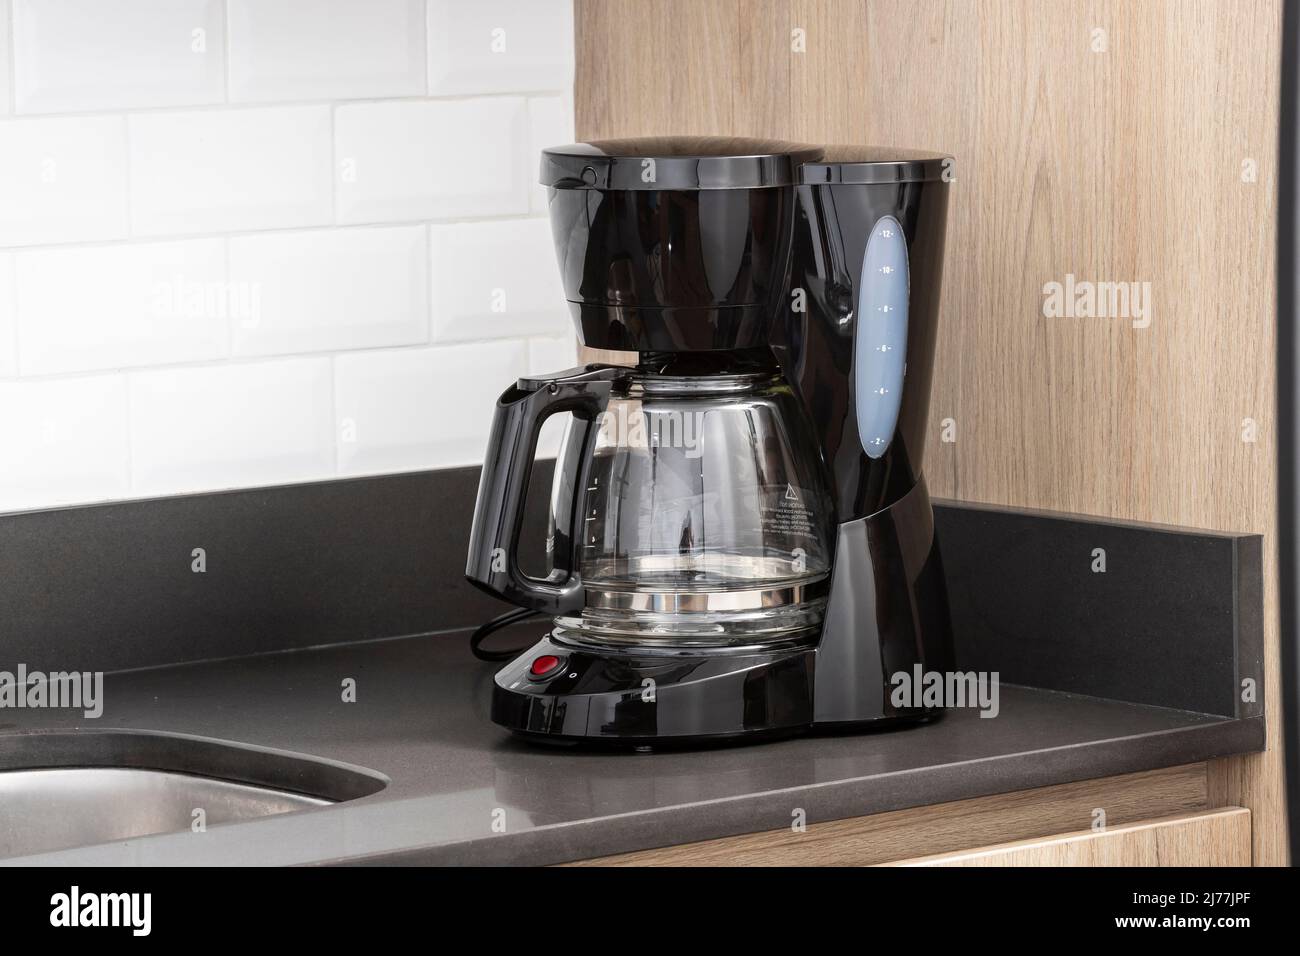 A Electric Coffee maker Black In The Kitchen Stock Photo